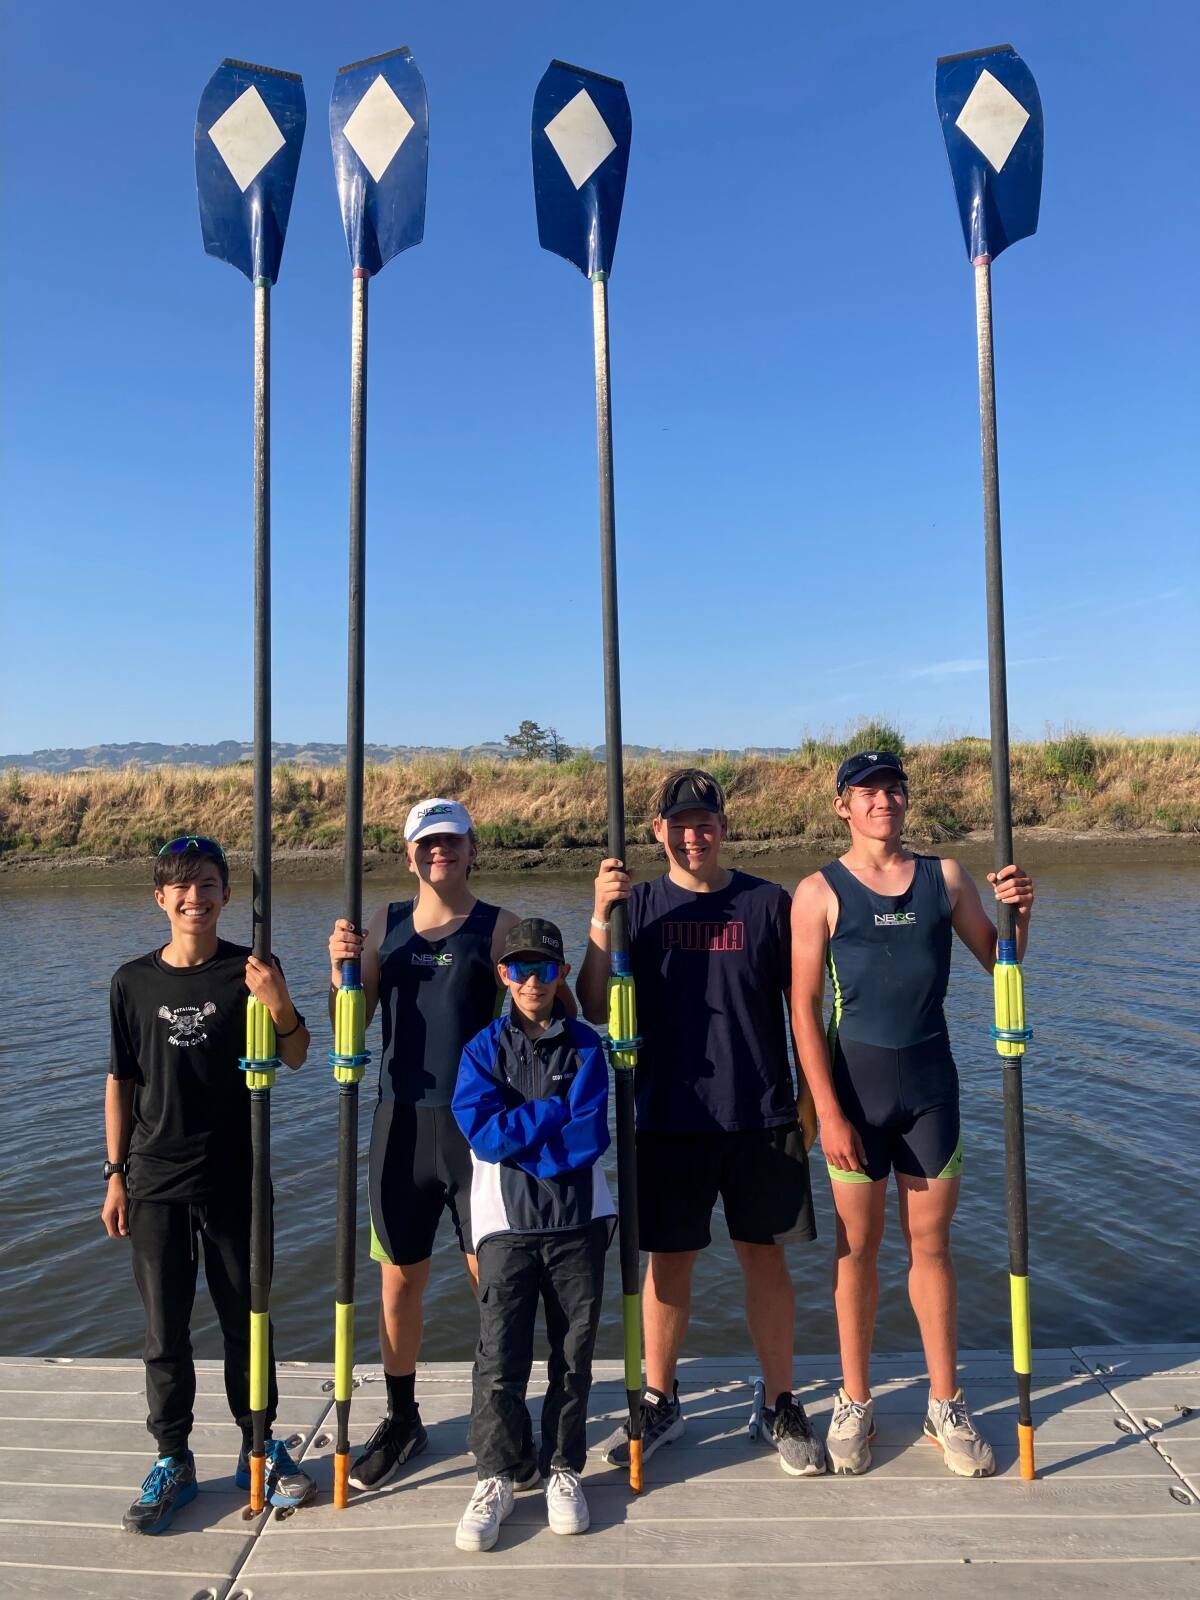 Petaluma 17under rowing team qualifies for Youth Nationals